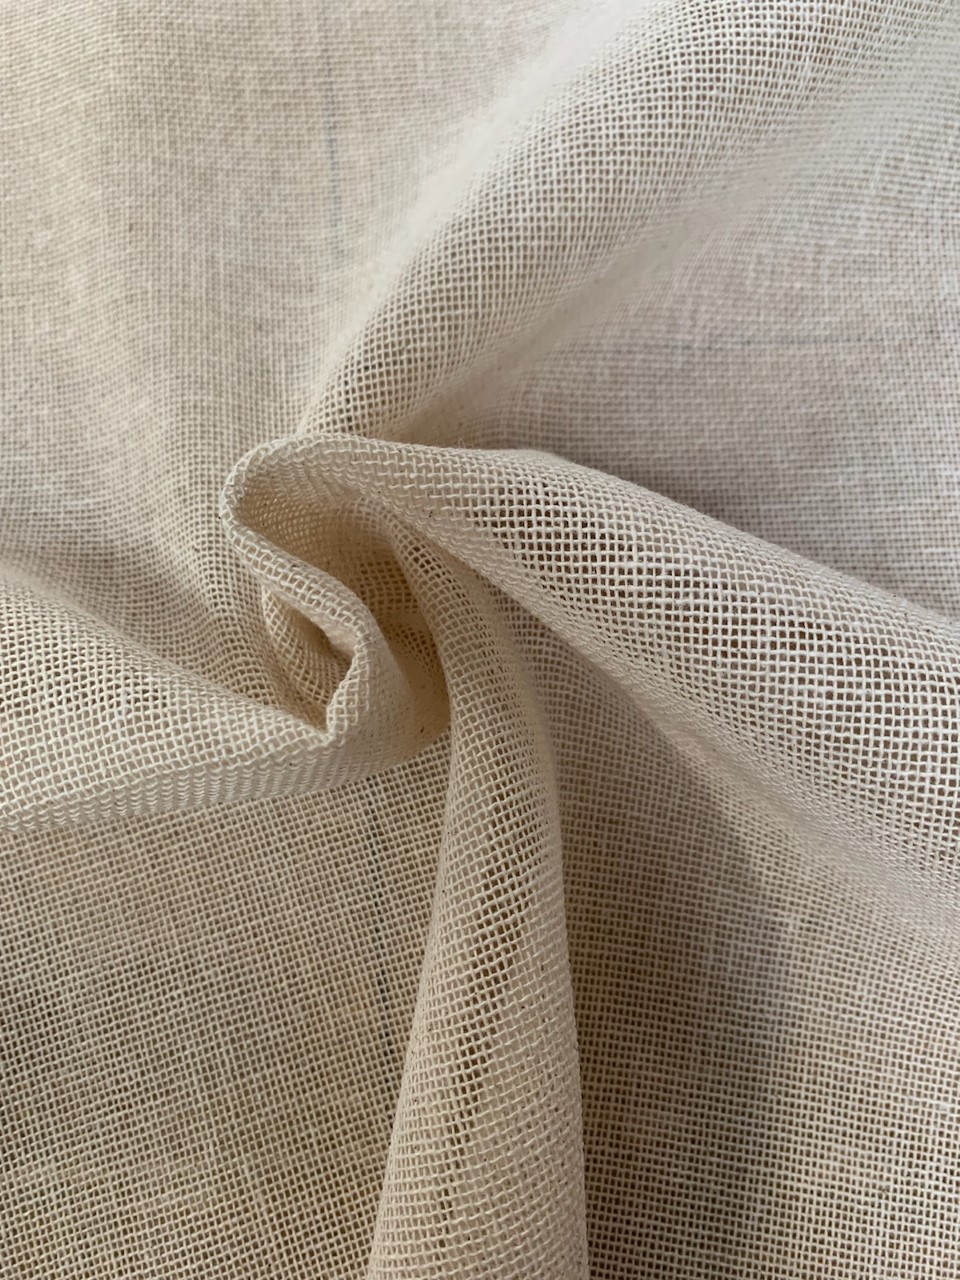 60" Natural Osnaburg By The Yard - Sheer Weave 100% Cotton